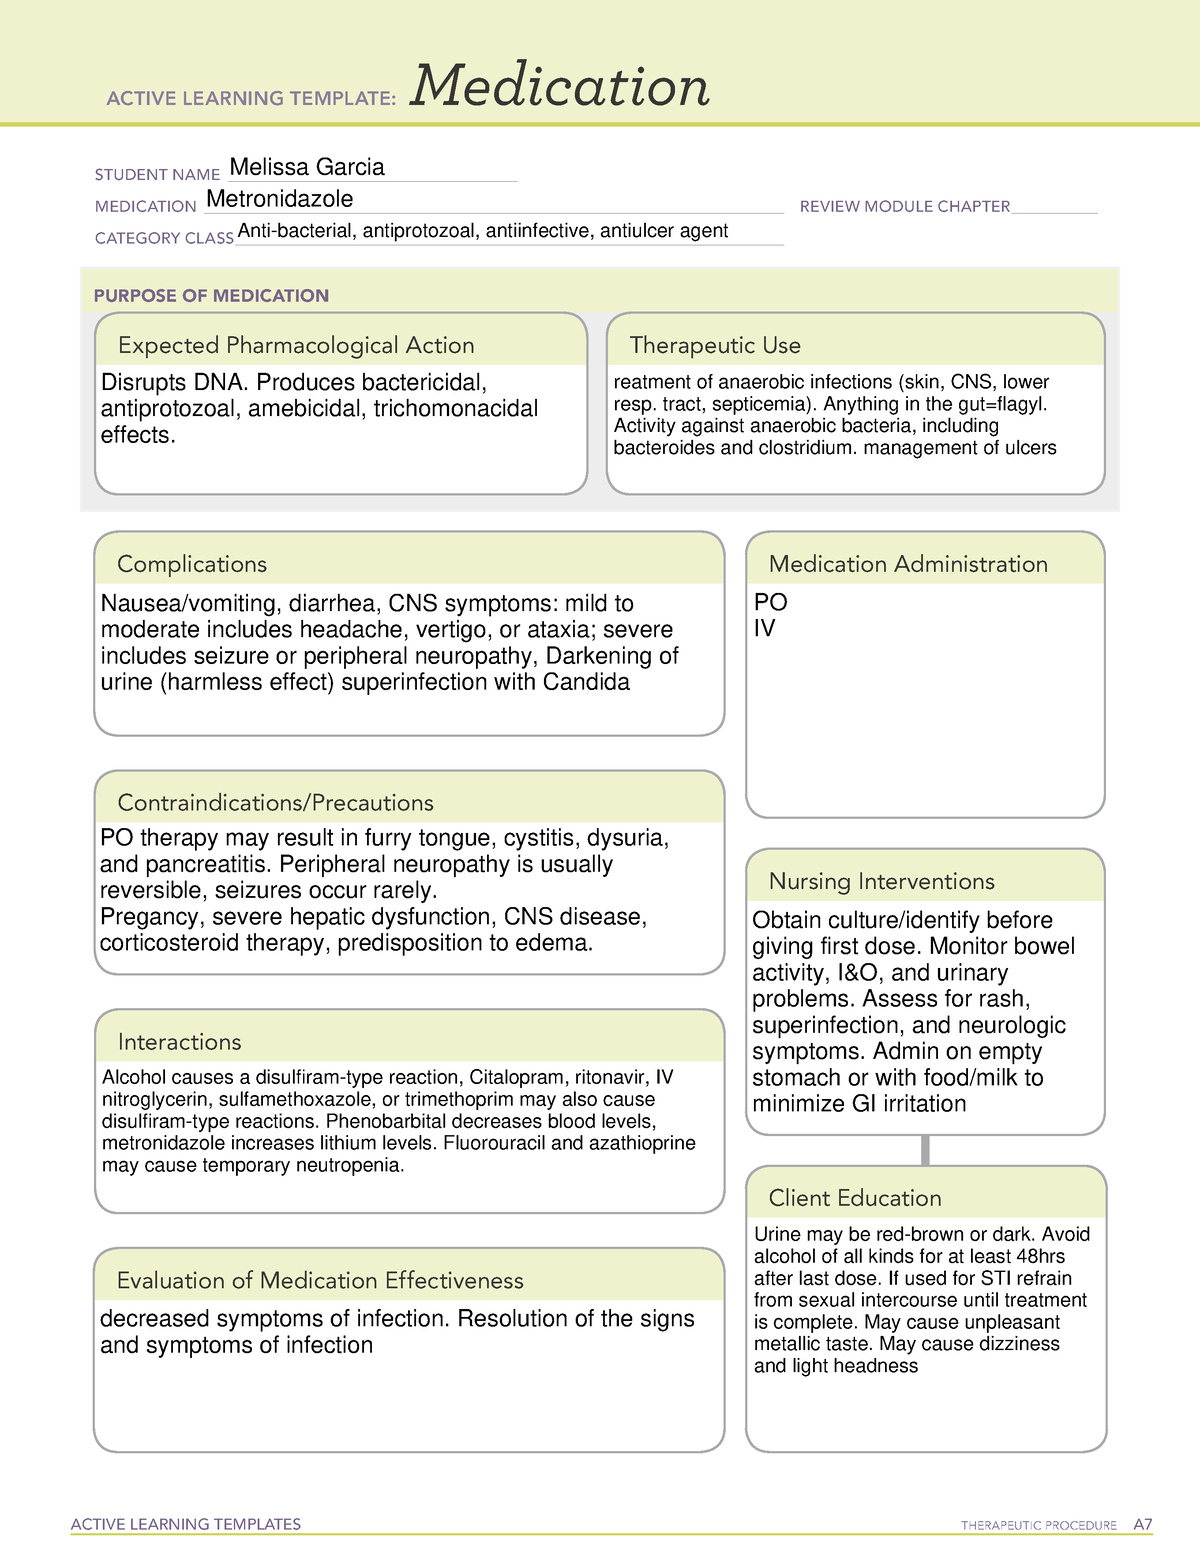 Metronidazole ati template ACTIVE LEARNING TEMPLATES THERAPEUTIC